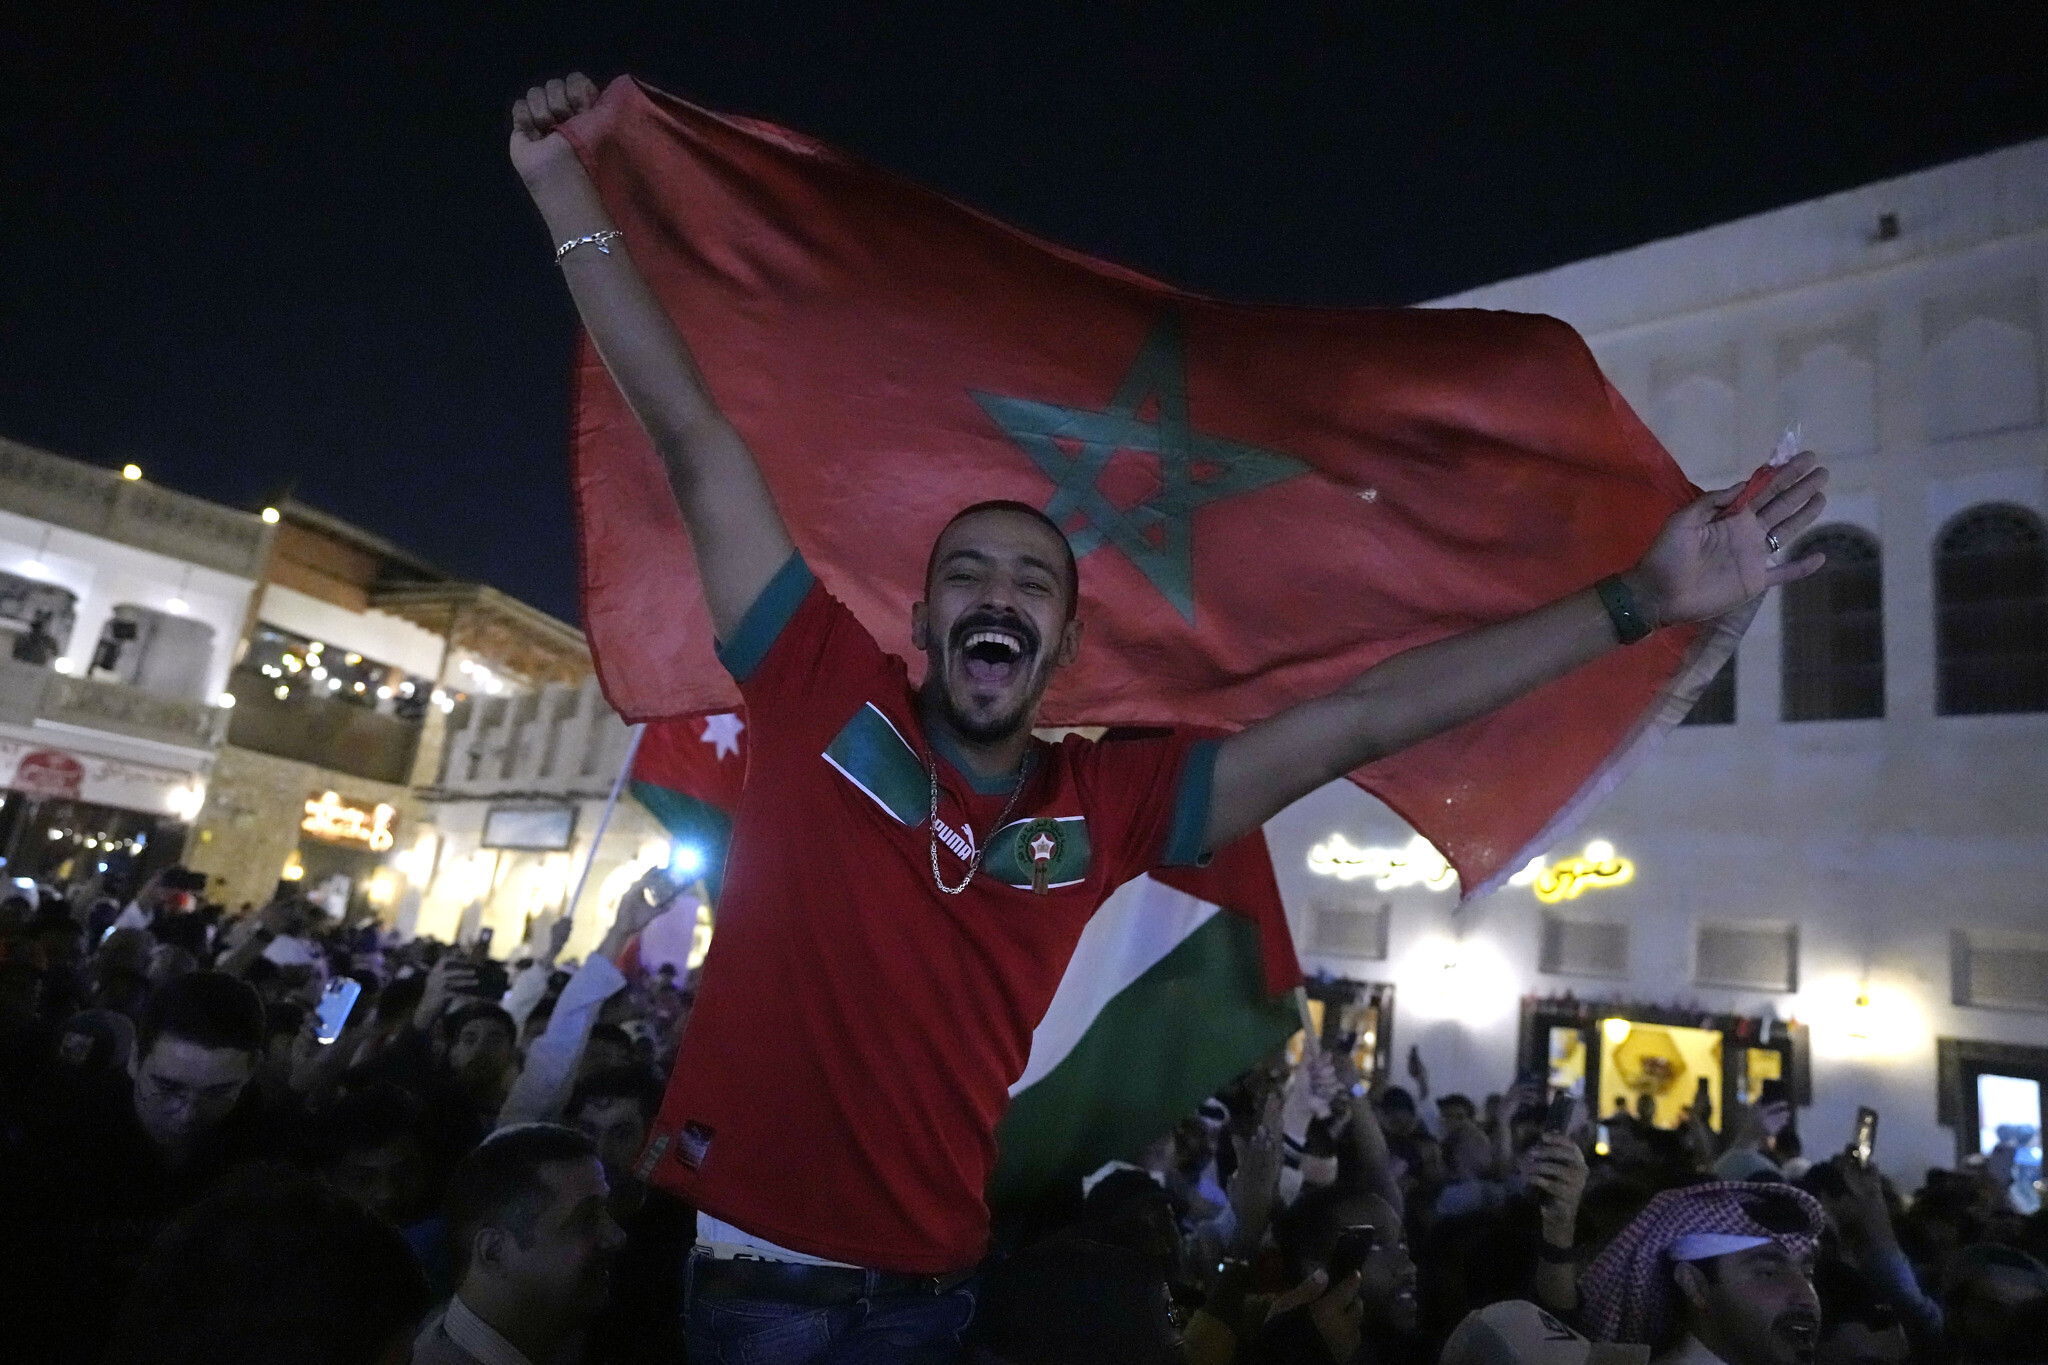 MOROCCANS' JOURNEY FROM PLAYER PROTESTS TO WORLD CUP SEMI-FINALS